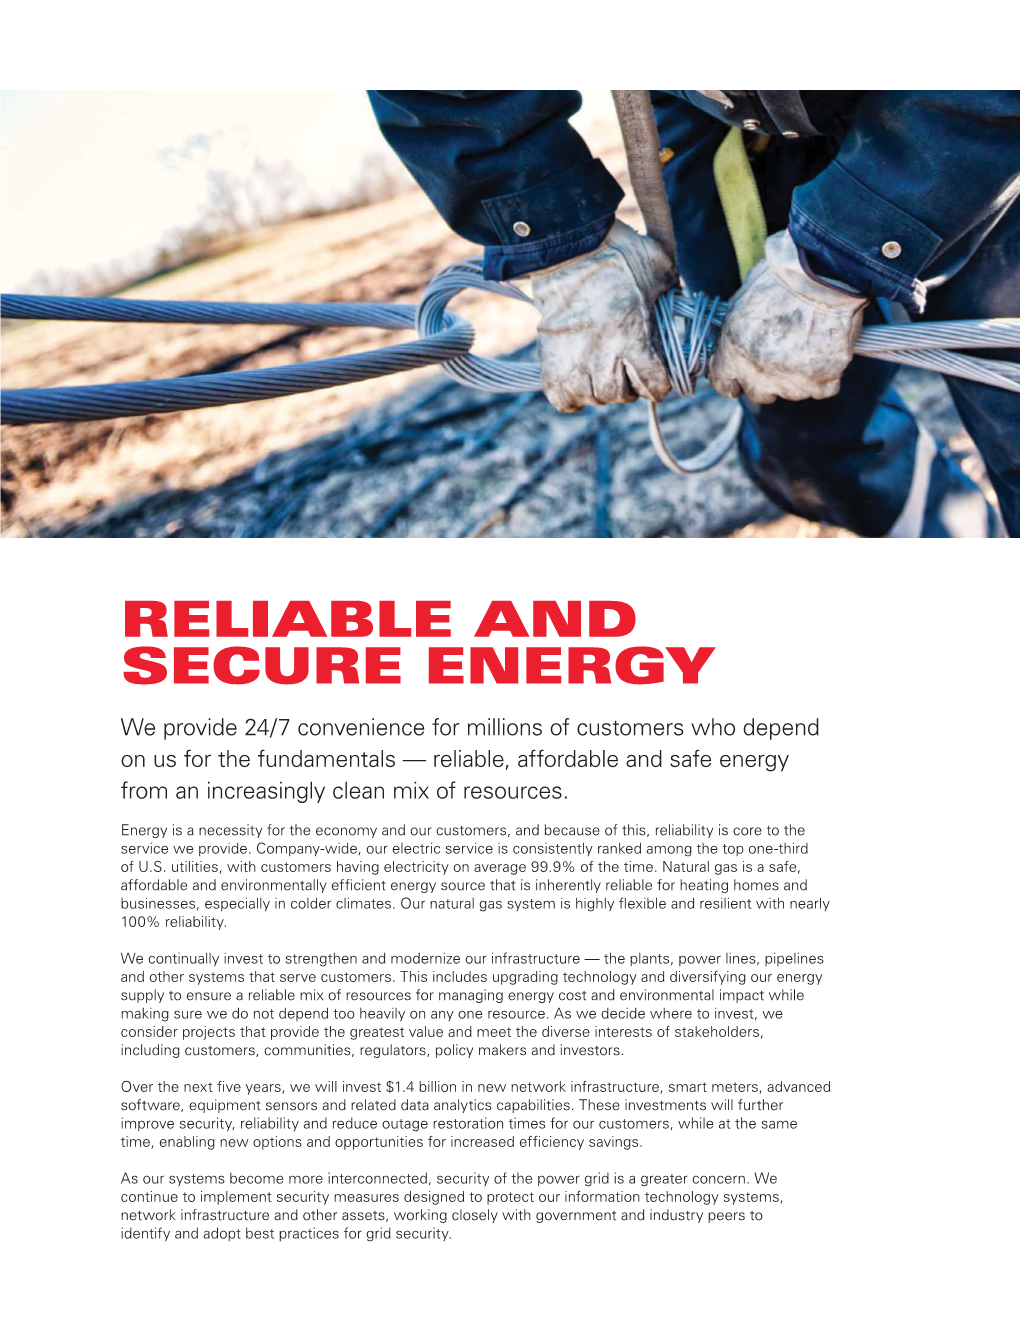 Reliable and Secure Energy